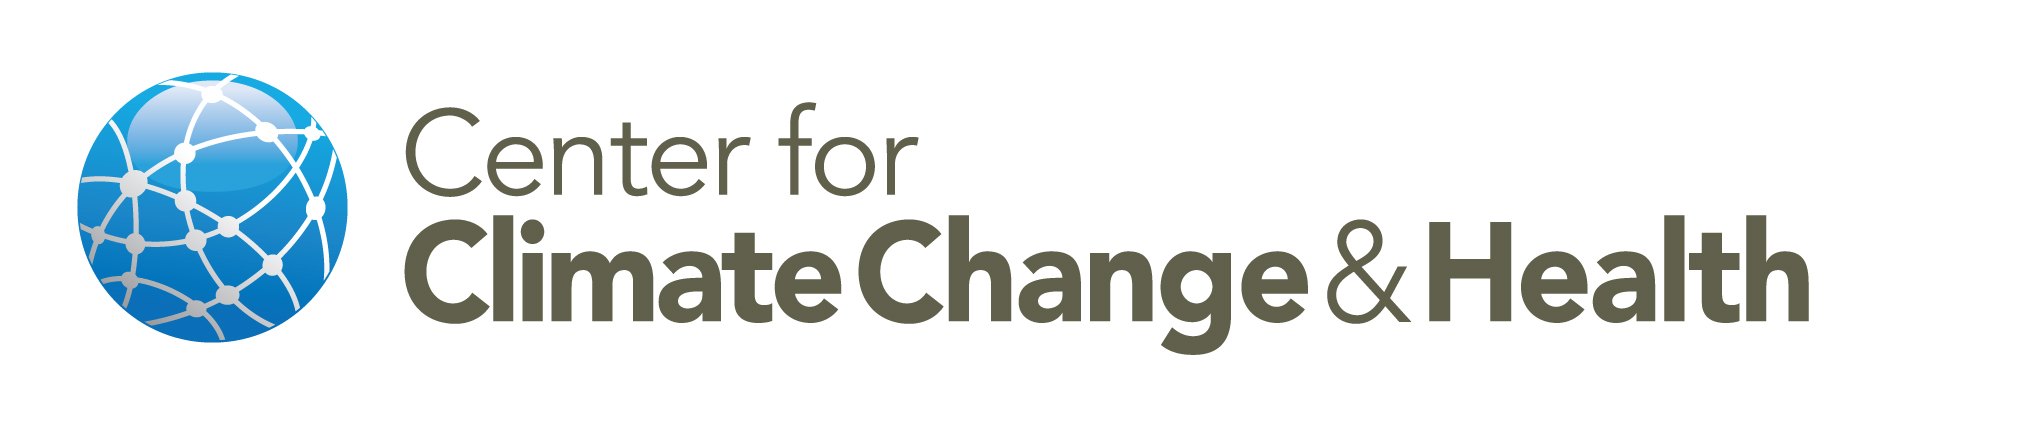 Center for Climate Change and Health